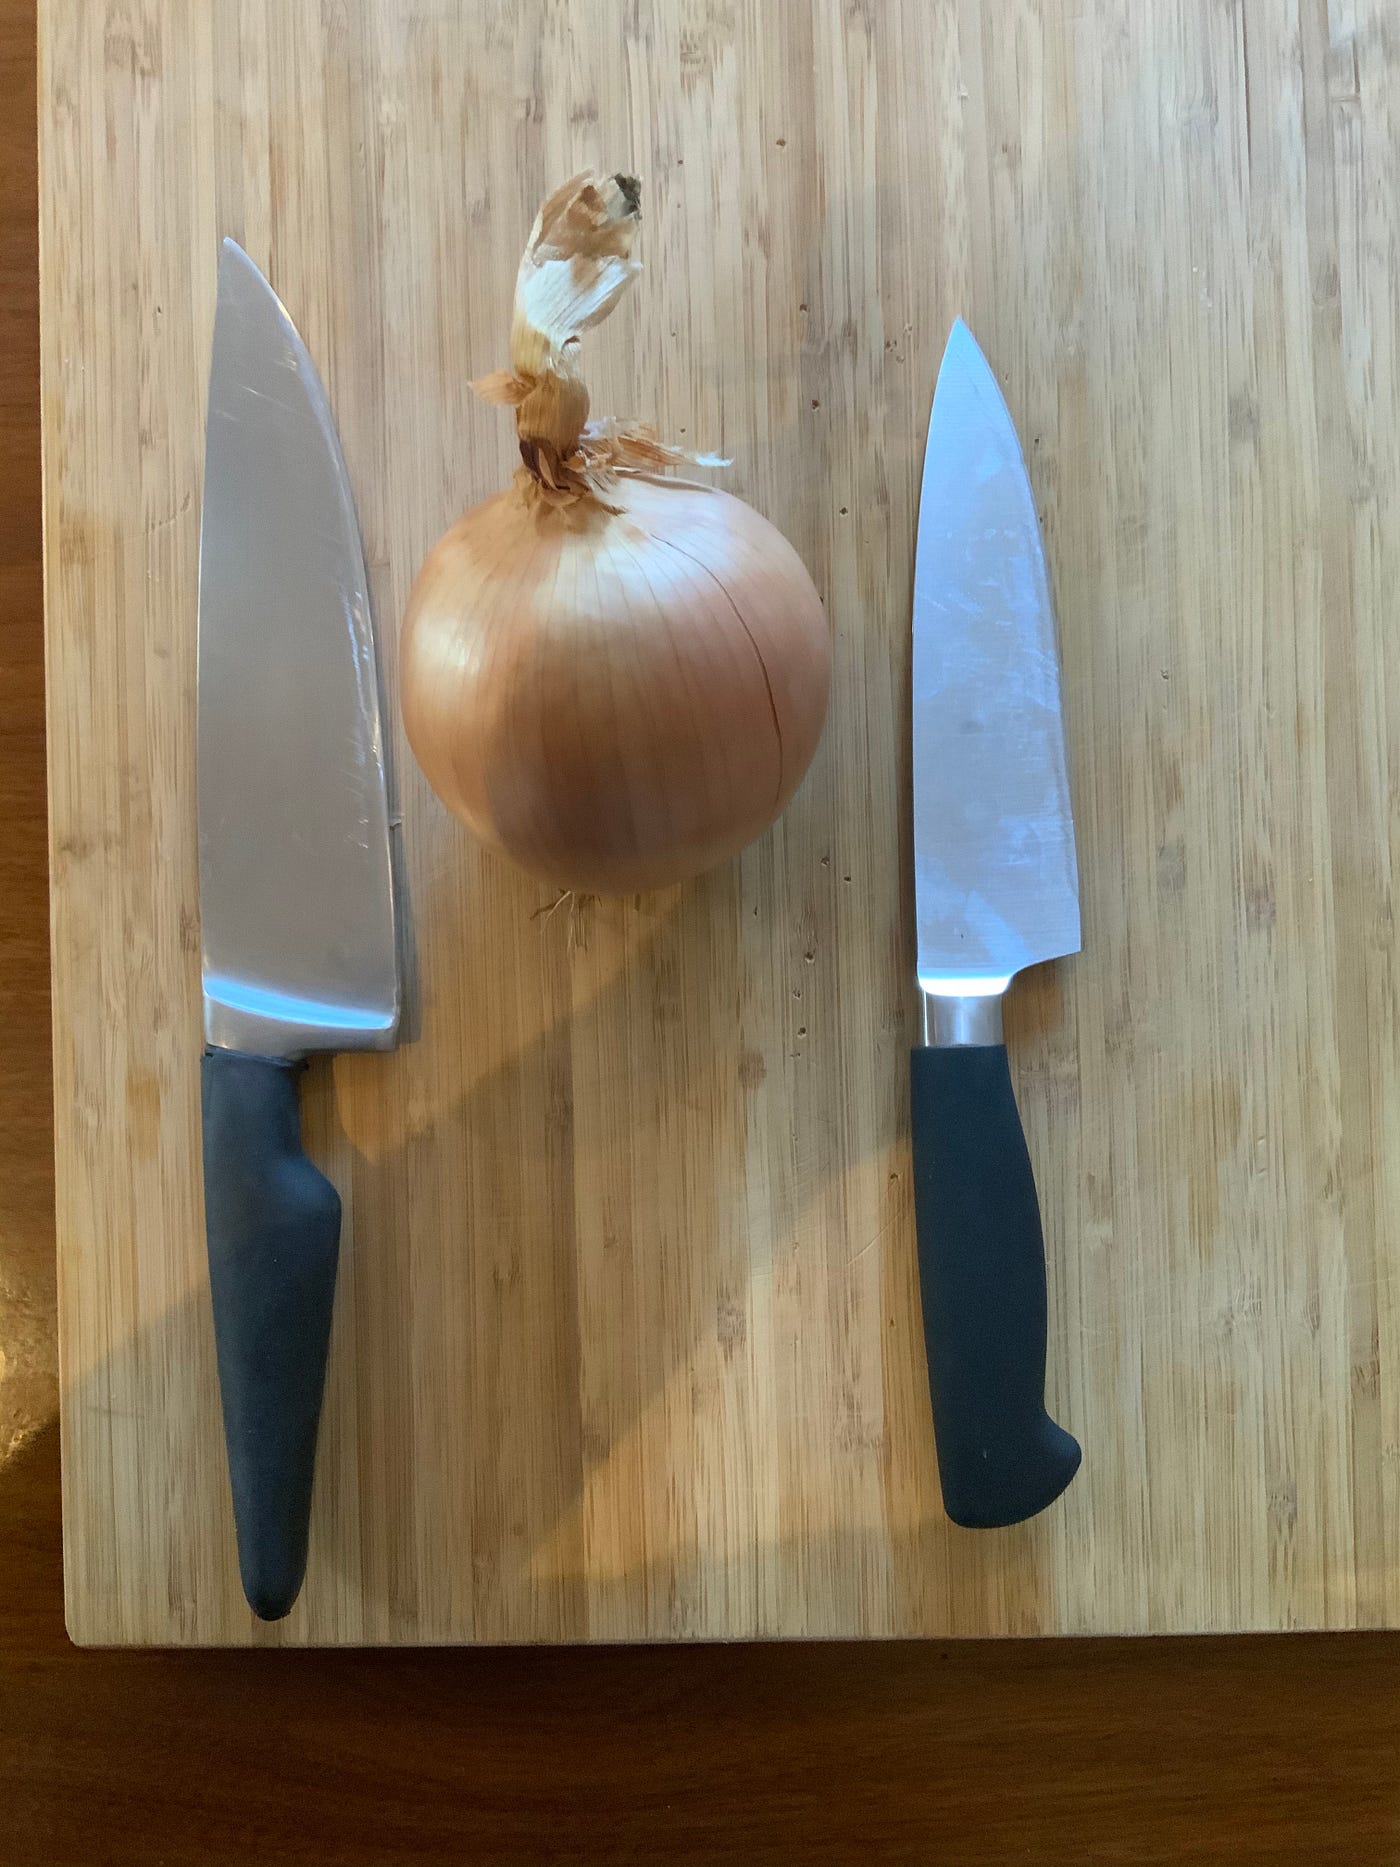 6-Inch vs. 8-Inch Chef's Knife (Which Size Is Better?) - Prudent Reviews